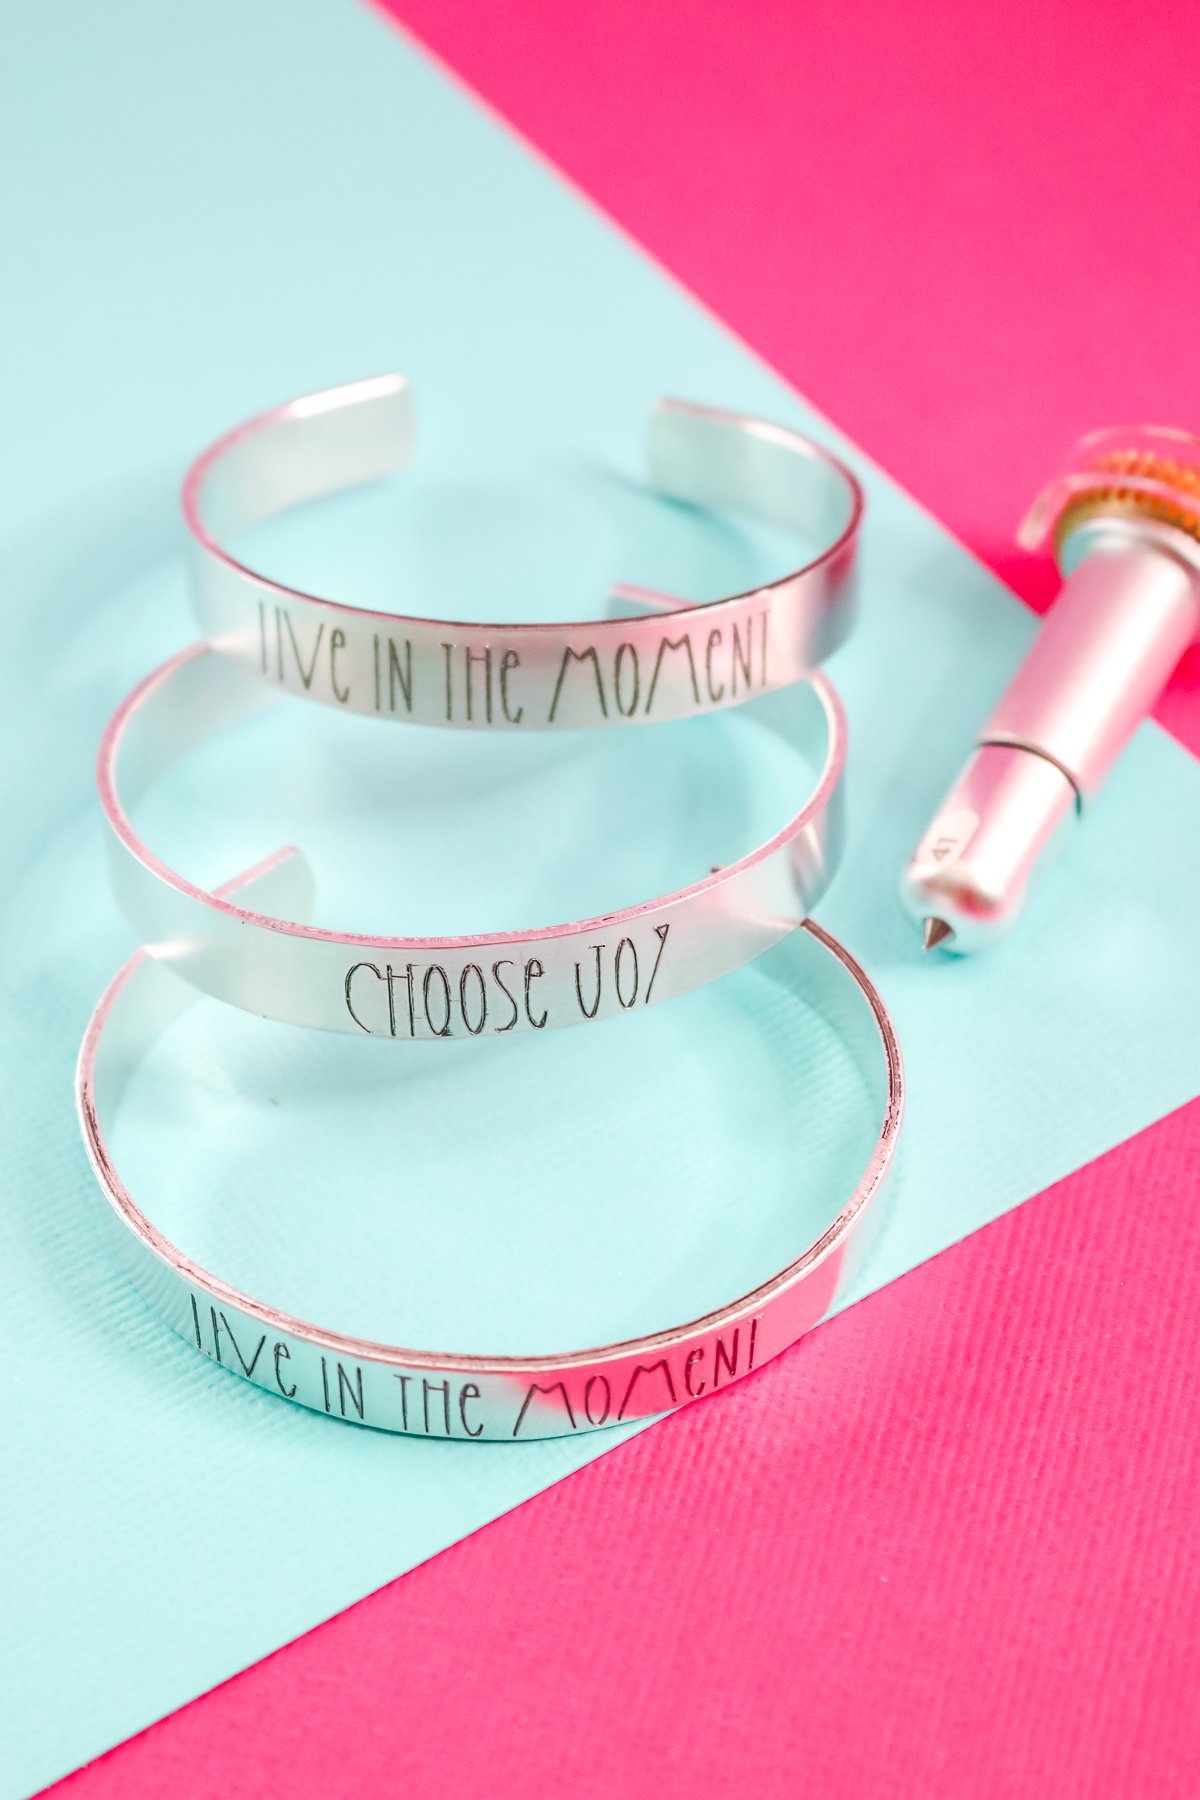 14 Metals You Can Engrave with a Cricut Maker - Well Crafted Studio